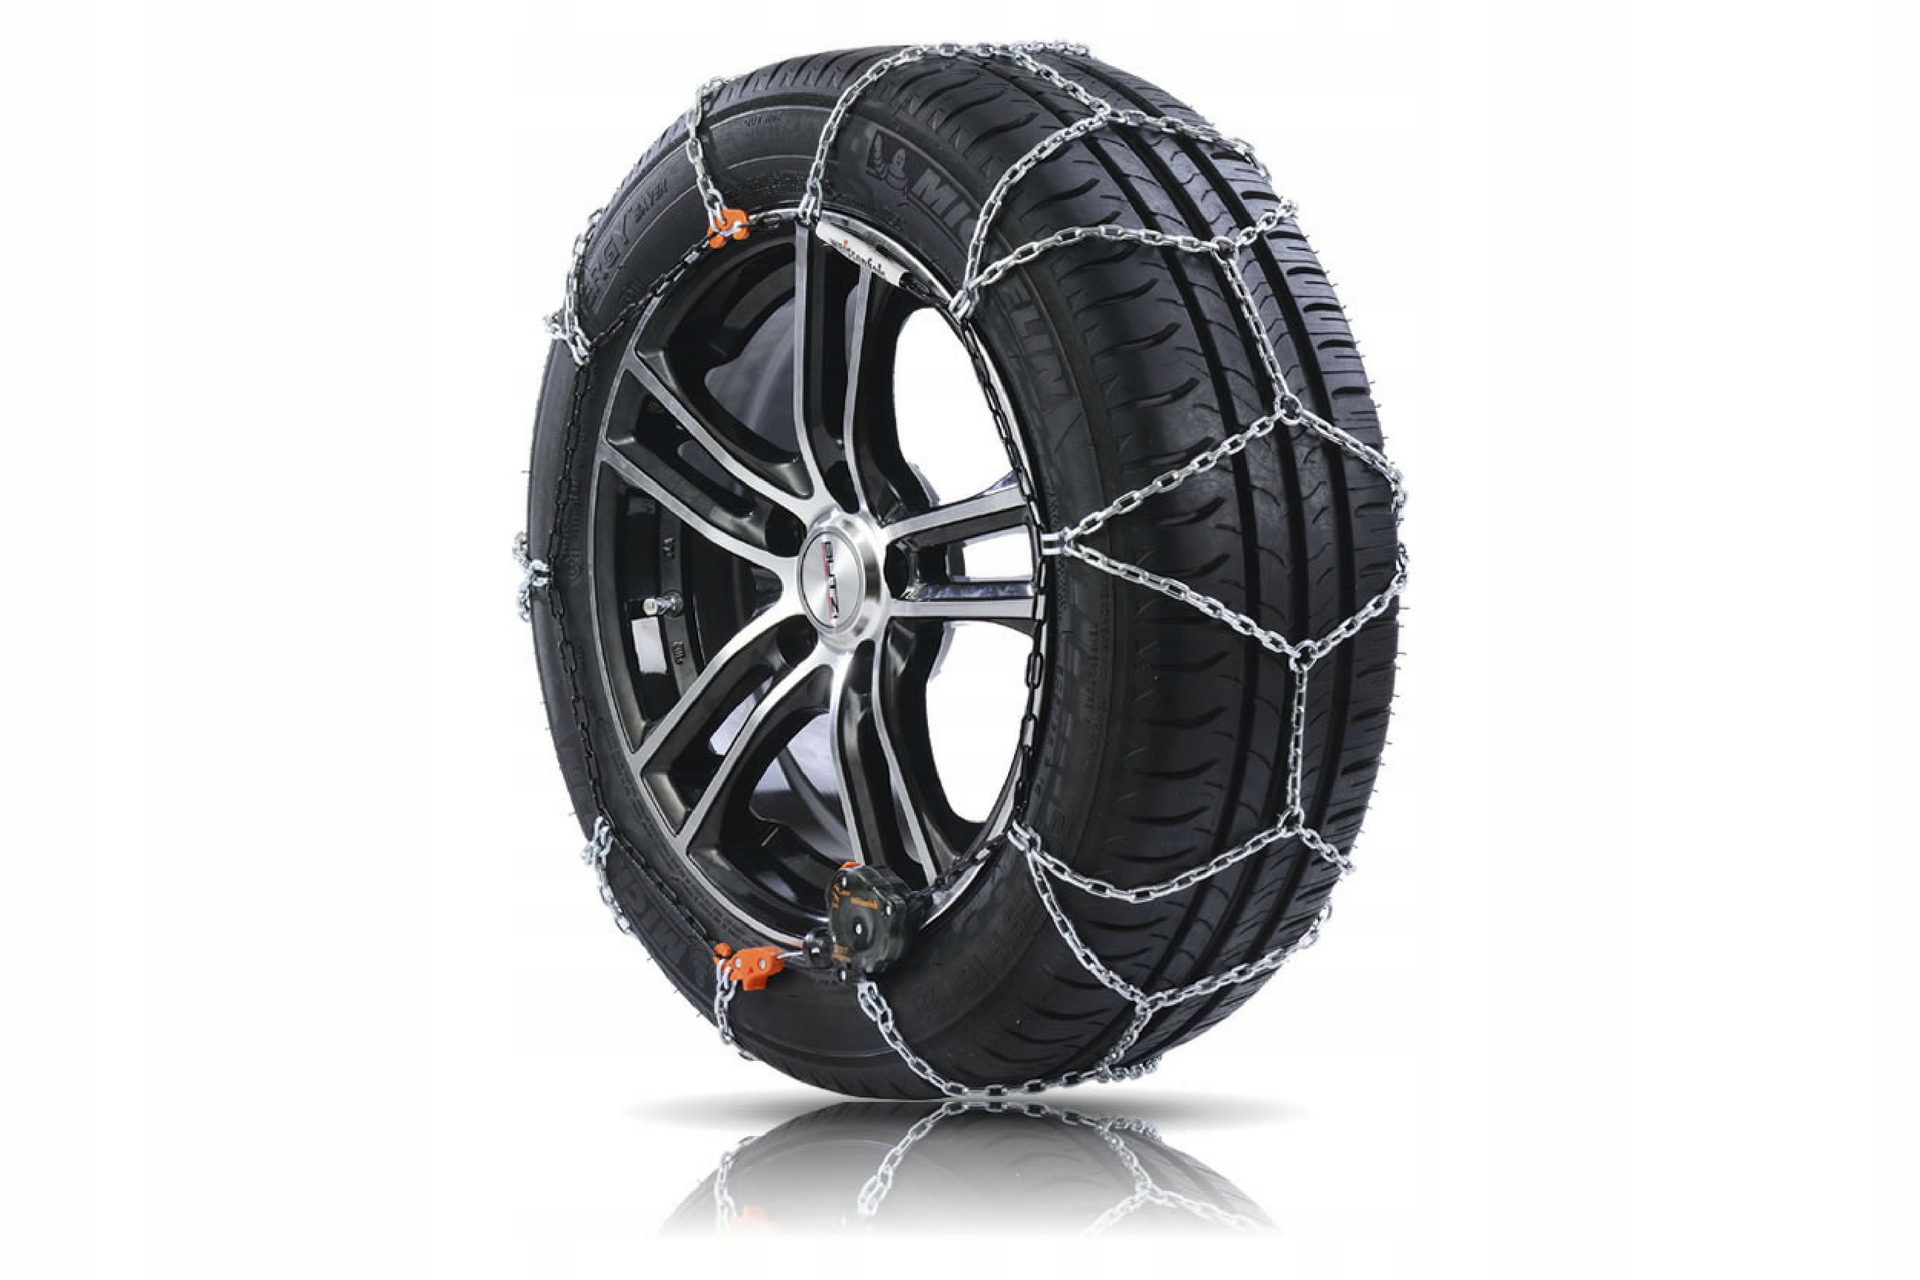  Chaines neige 9mm ECO 100-215 60 R16, 225 40 R18, 235 50 R16,  245 45R16, 215 50 R17 et +